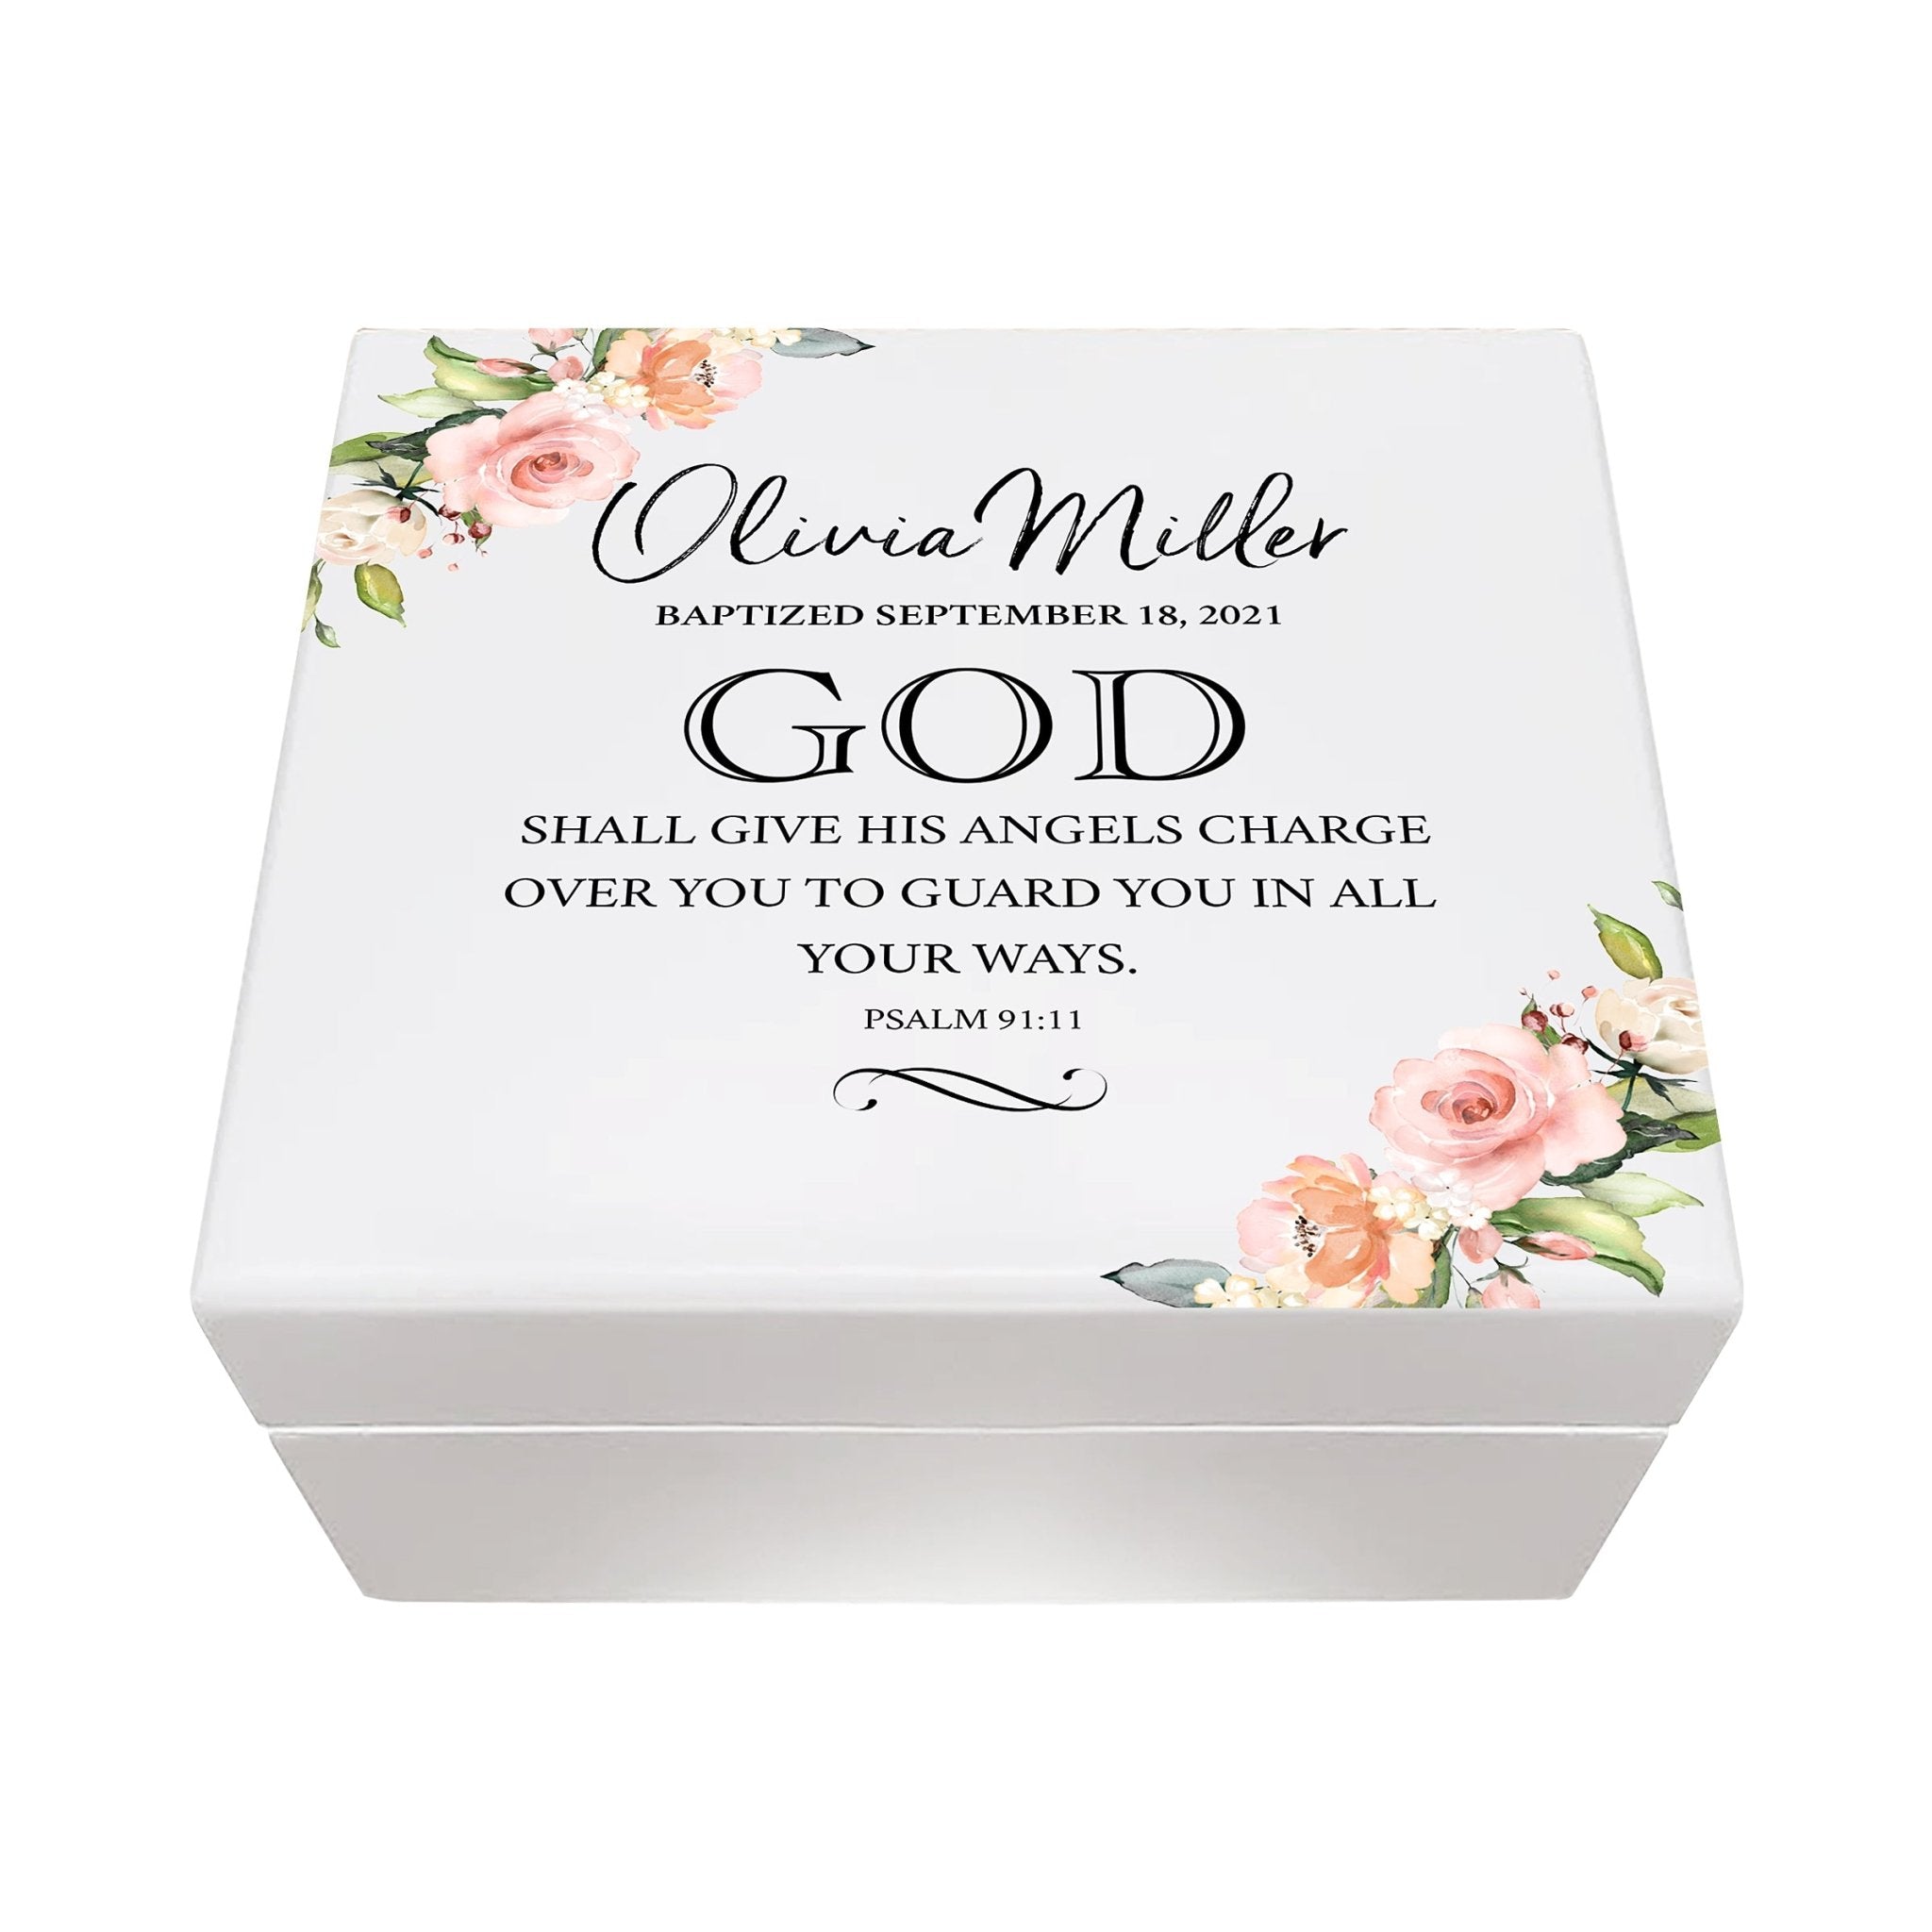 Authentic Existence® Prince of Peace Gift Box - Devotional, Tumbler